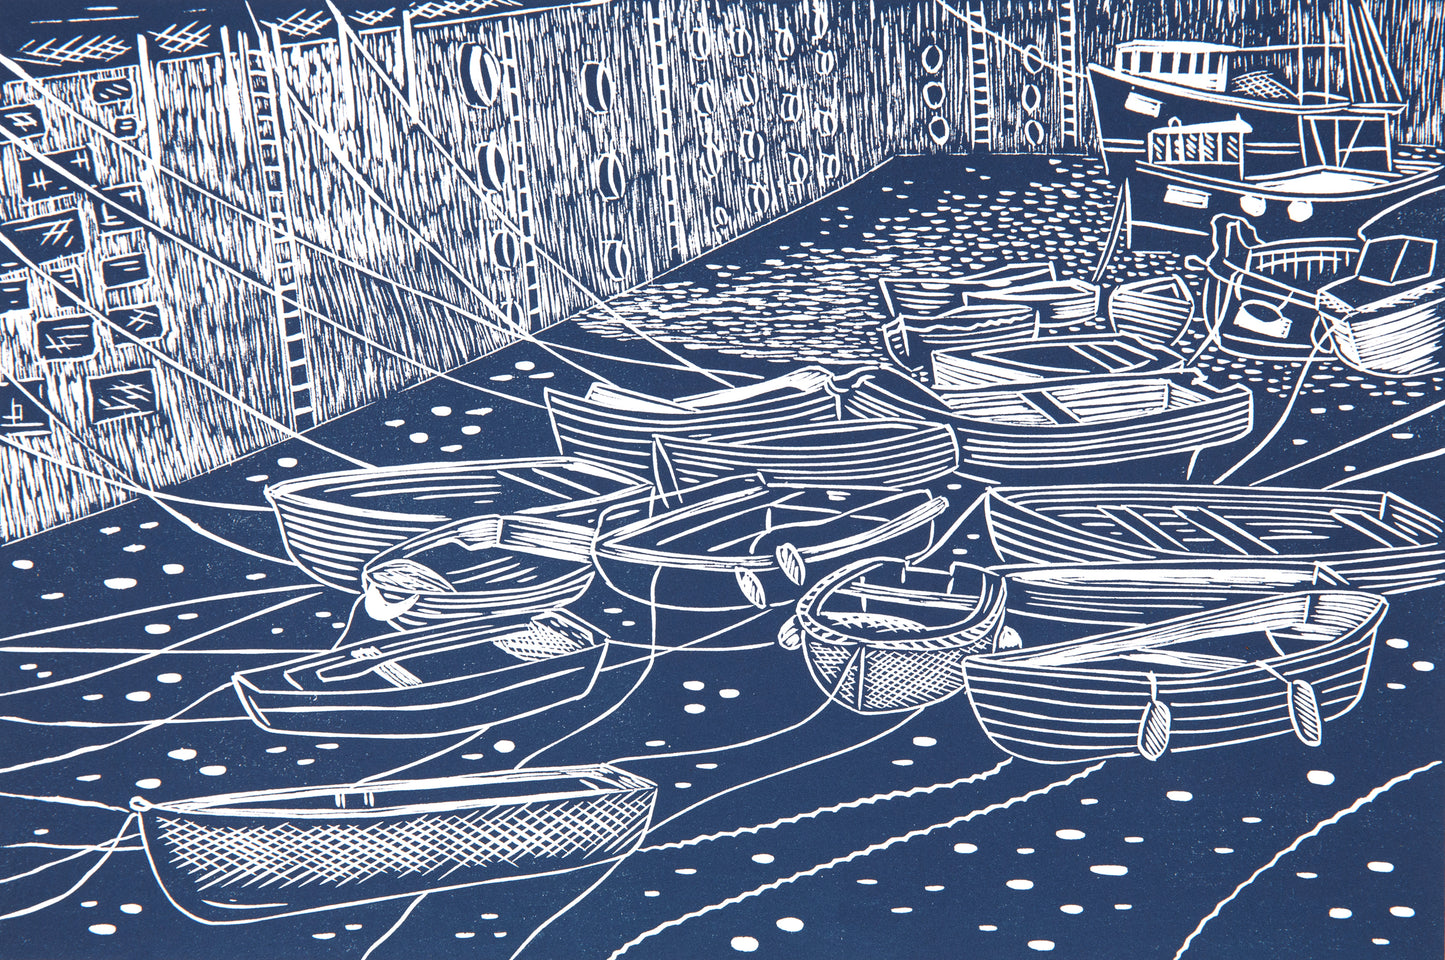 Low Tide, Mevagissey, Limited Edition Lino Print